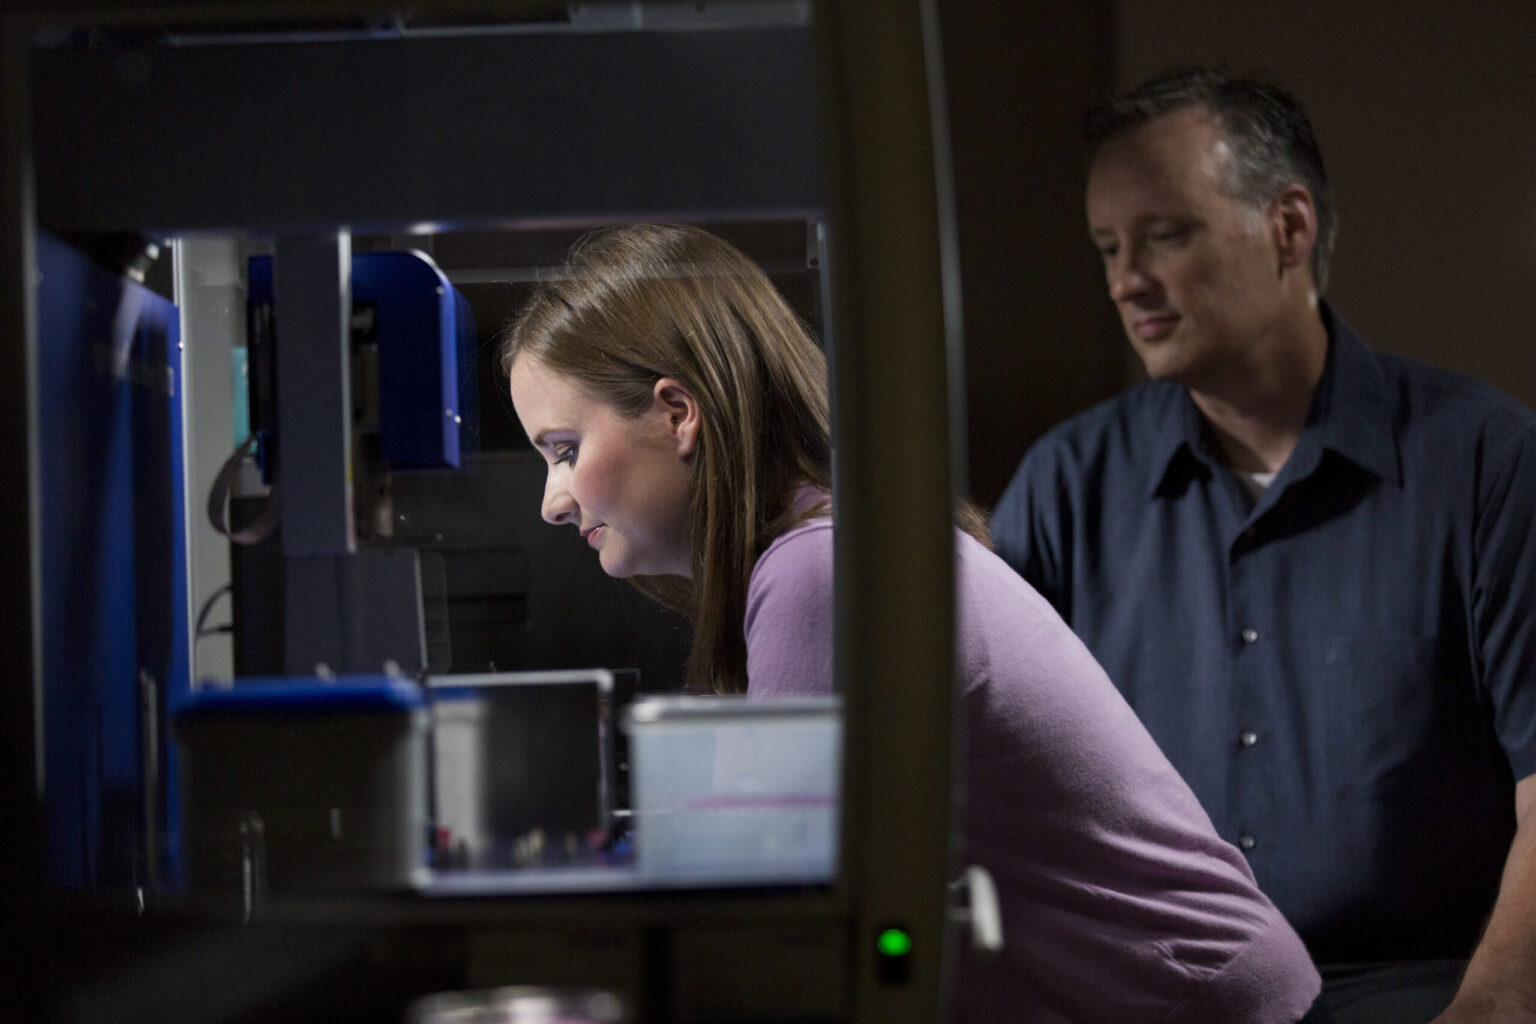 Emily Baker, a former West Lab UGA Ph.D. graduate student, now serving as the director of nonclinical research at Aruna Biomedical, seen here working in the lab with Steven Stice, the director of the RBC and co-founder of Aruna Biomedical. The team is working on clearance from the FDA for the first-in-human stroke clinical trial using exosome technology. (Andrew Davis Tucker/UGA)